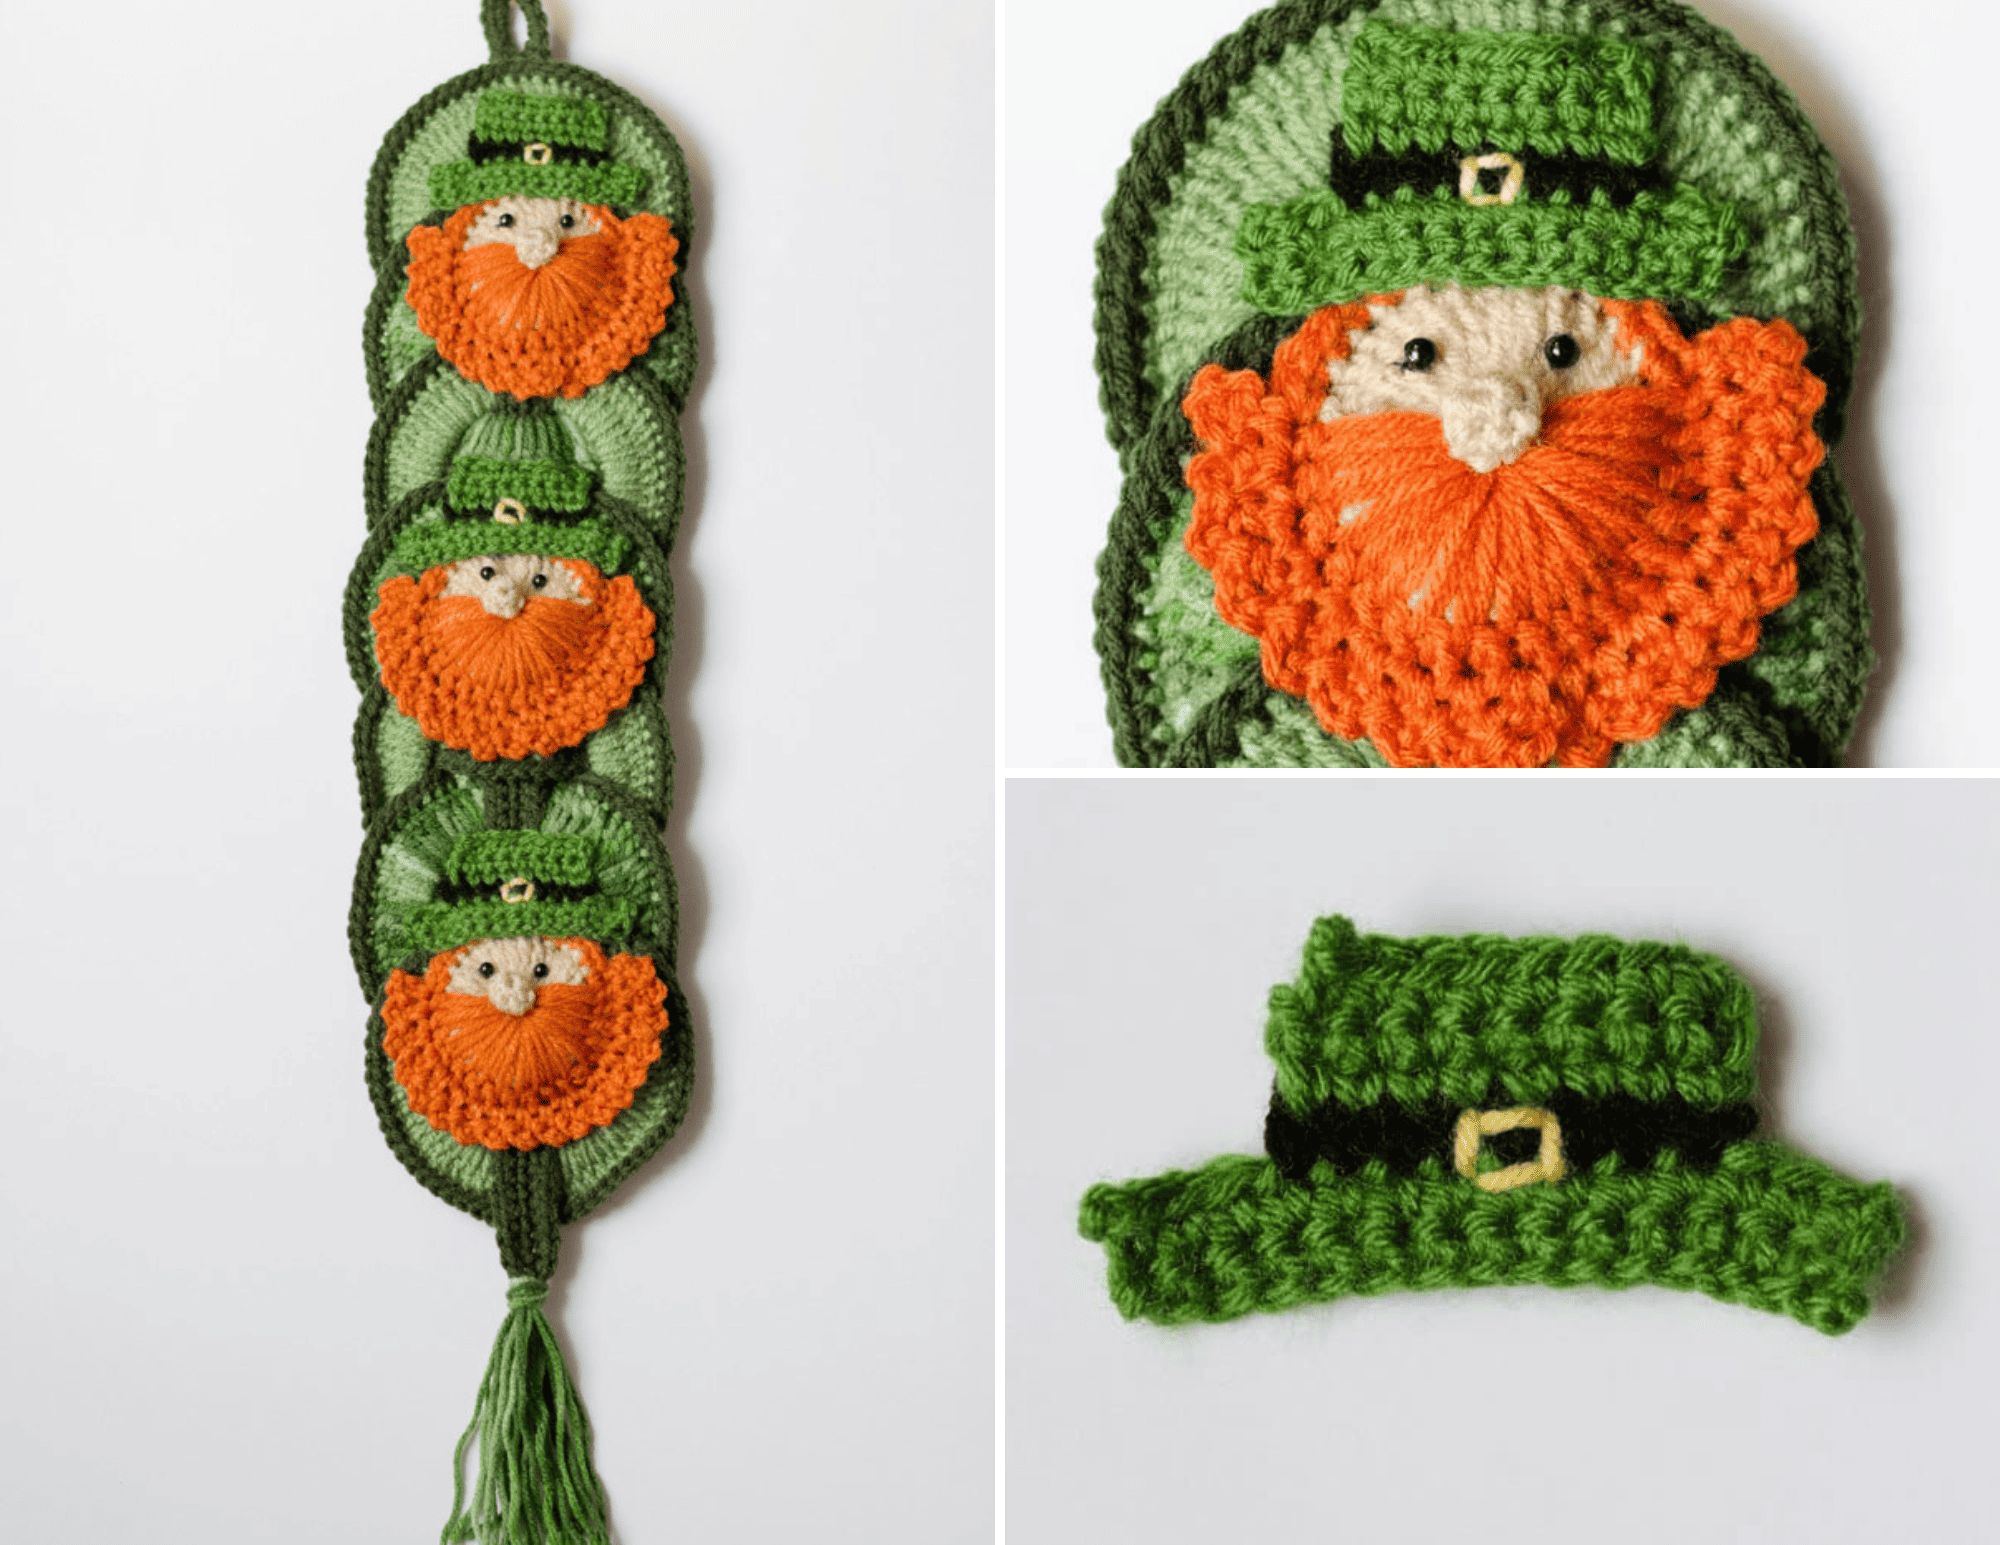 Collage of crochet leprechaun appliques on a wall hanging